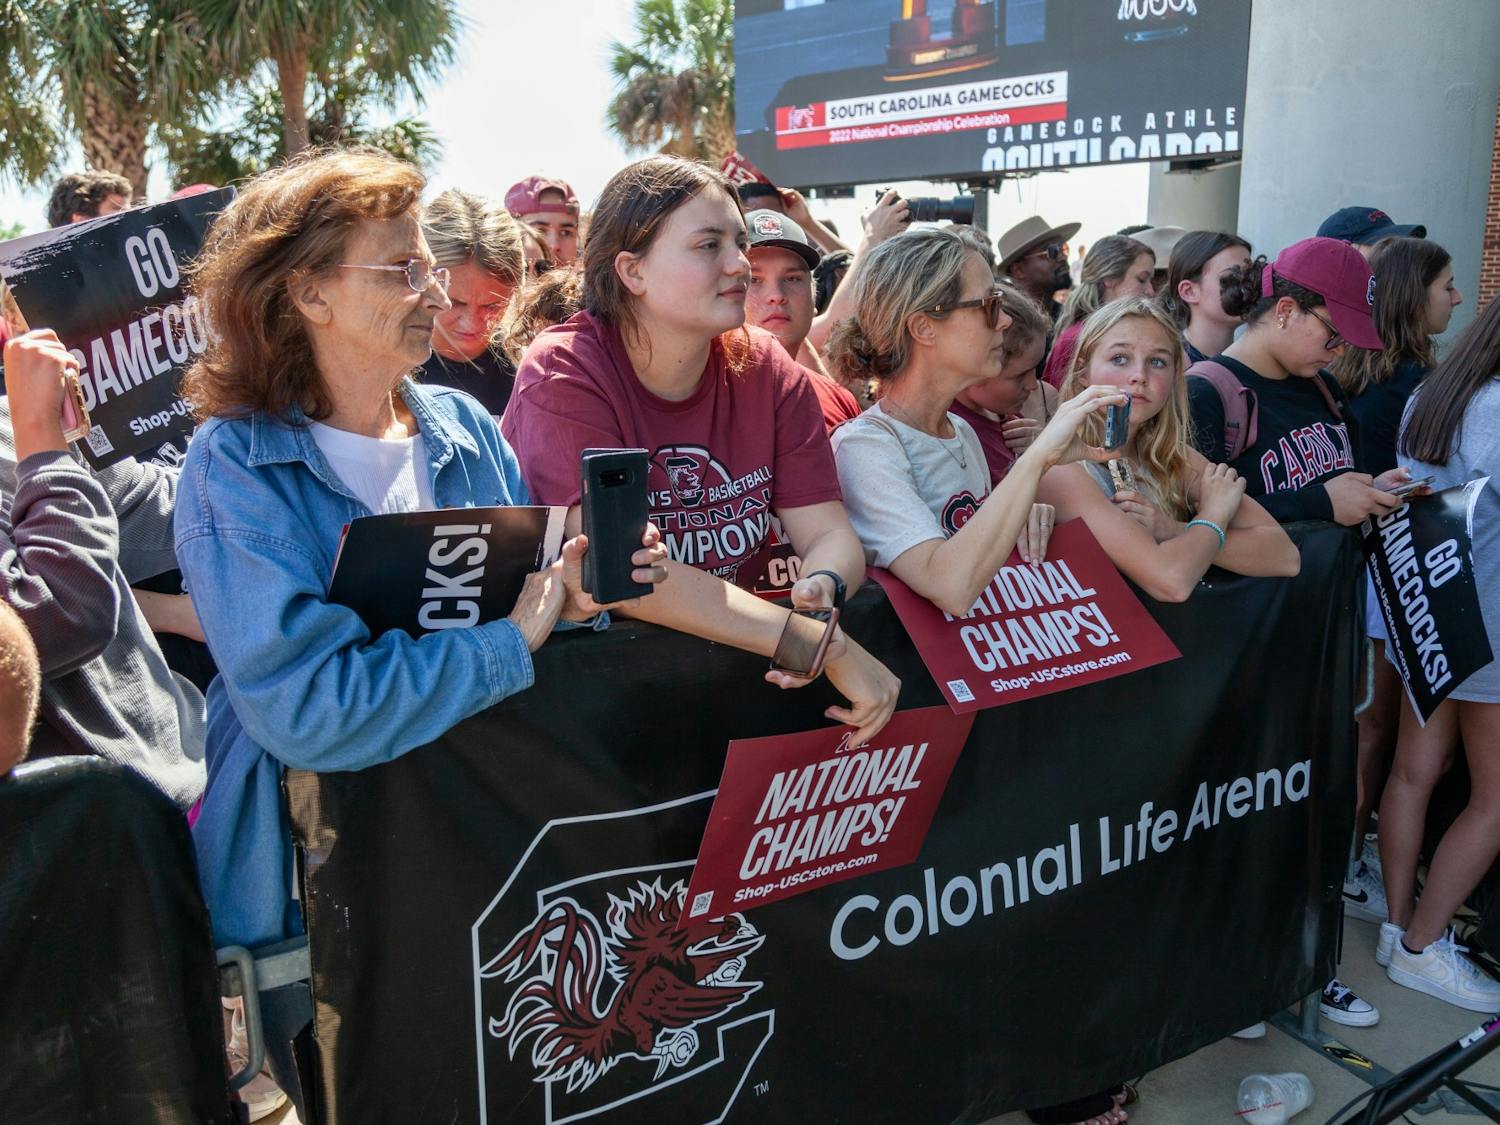 South Carolina fans take photos and hold signs at Colonial Life Arena in Columbia, SC on April 4, 2022. Fans waited for the team's arrival outside of the main entrance.